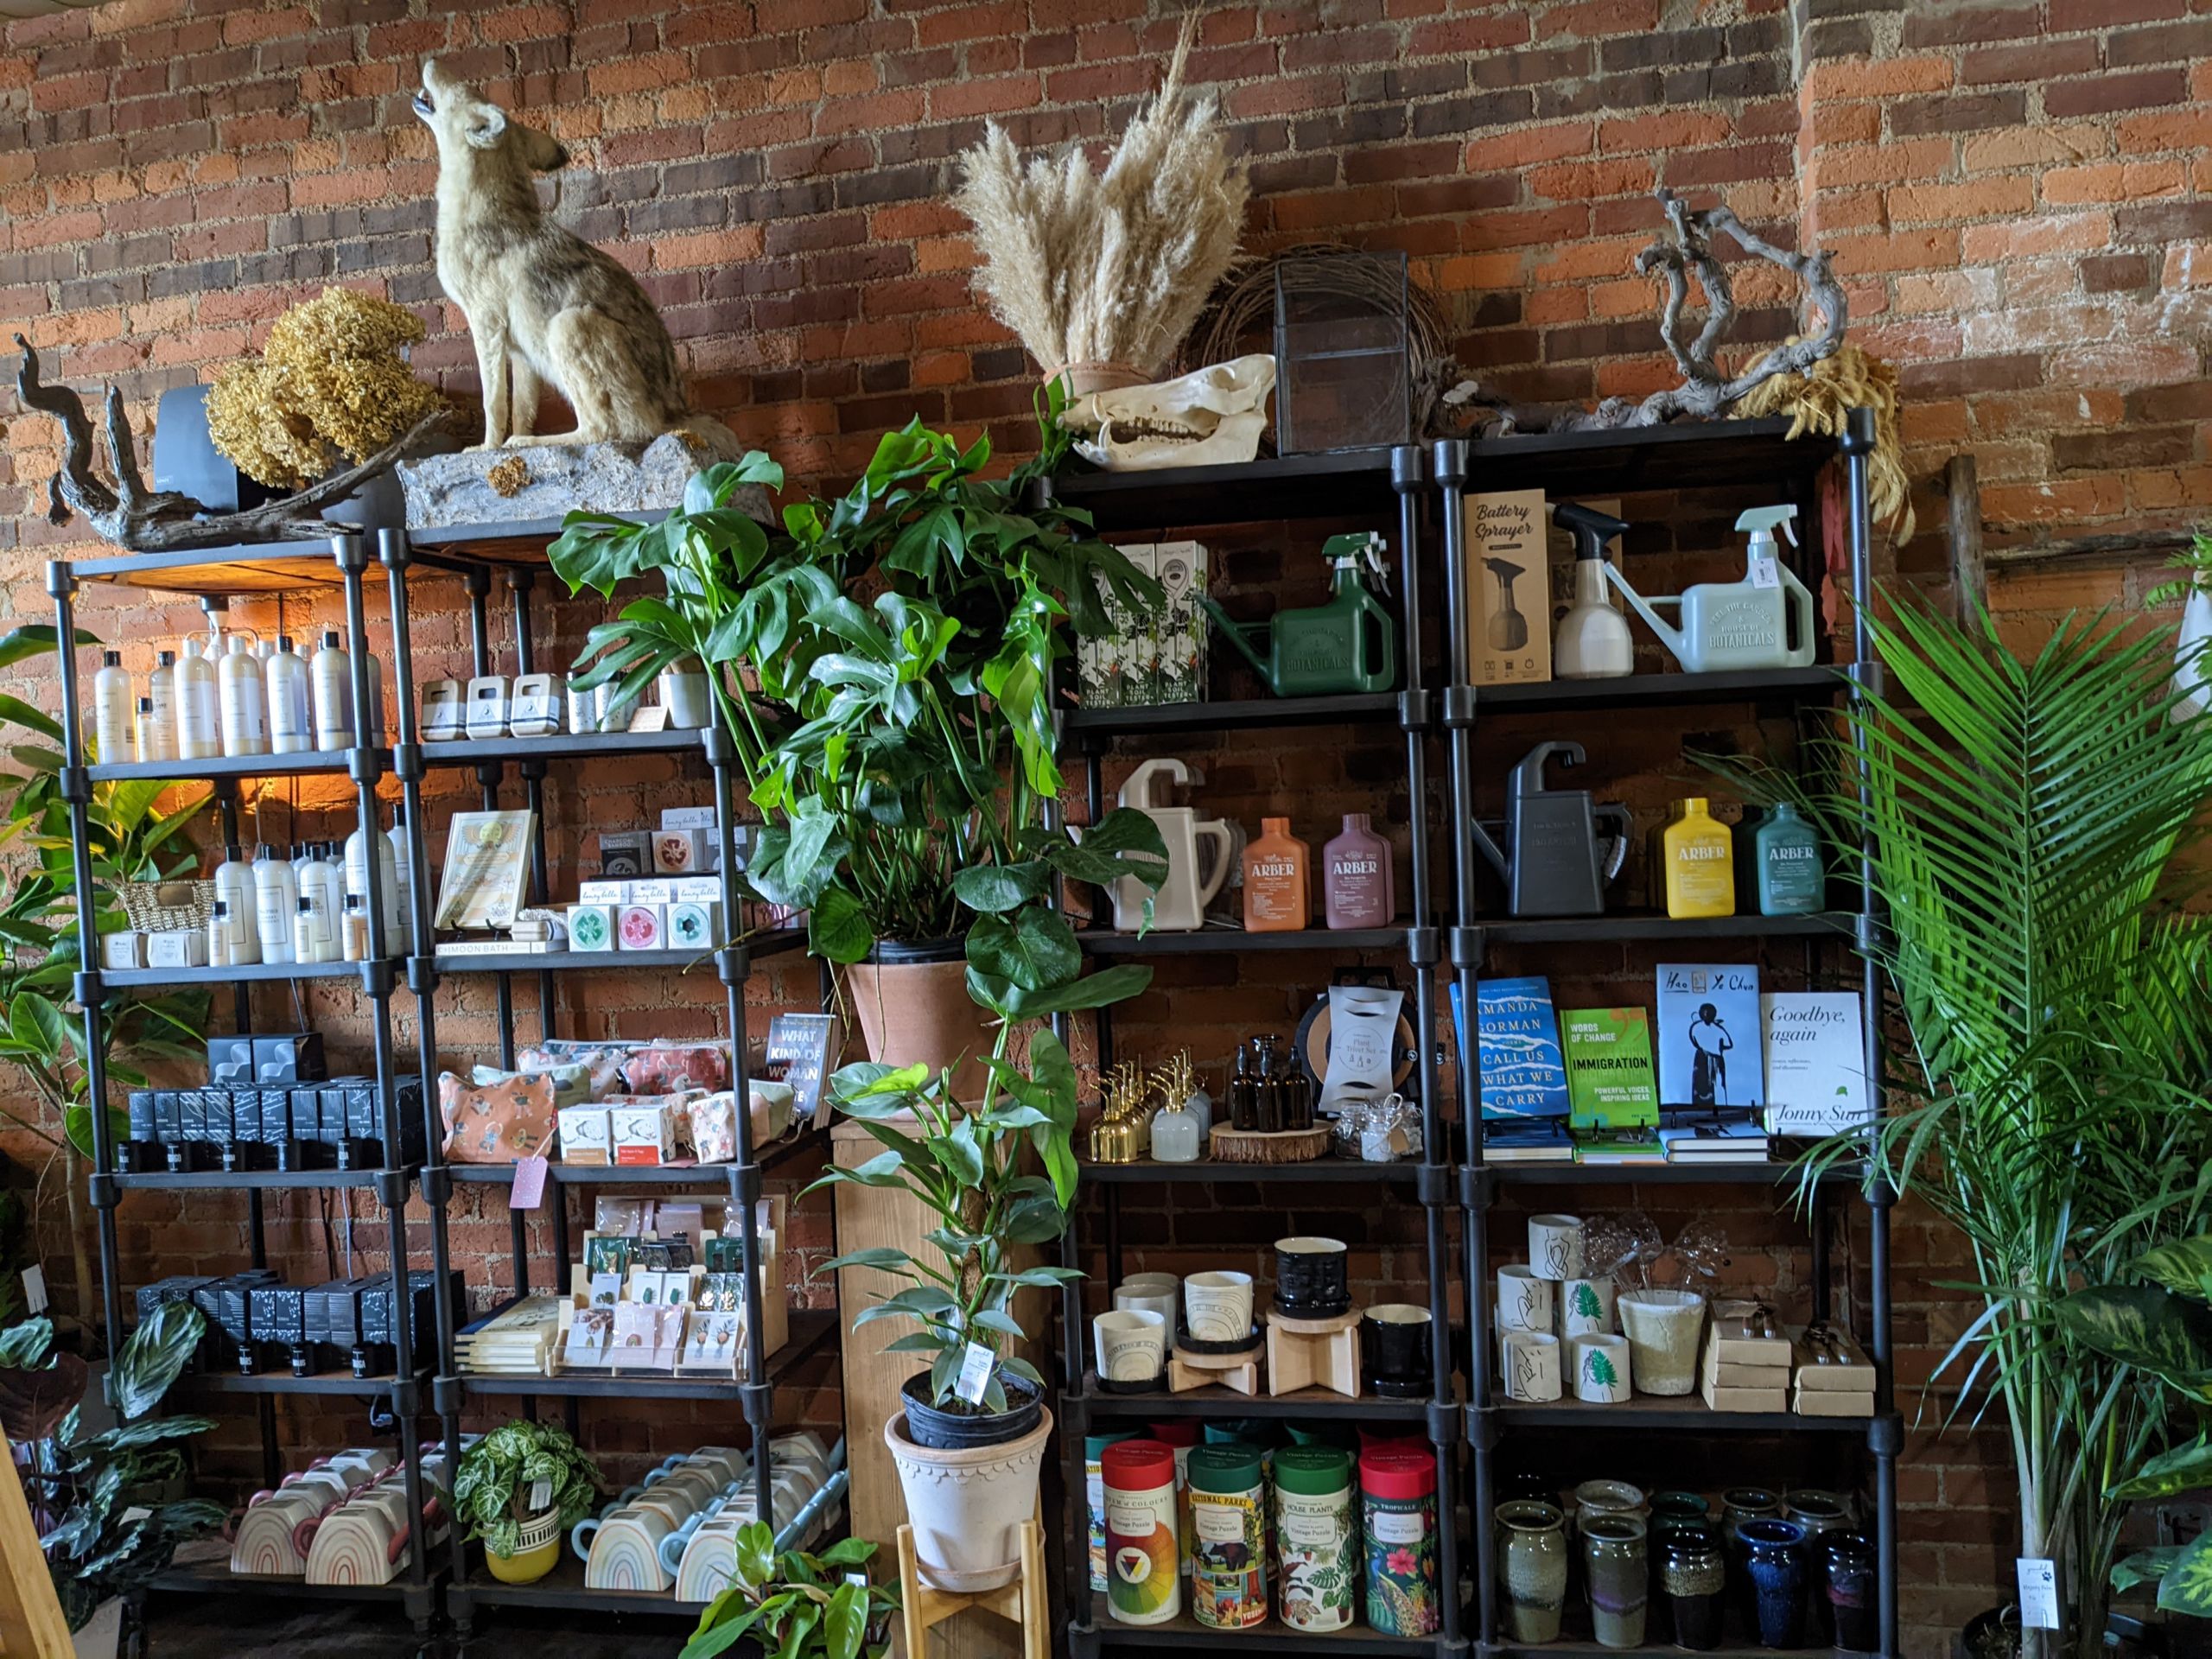 The interior of Grounded Plant & Floral Plant Store